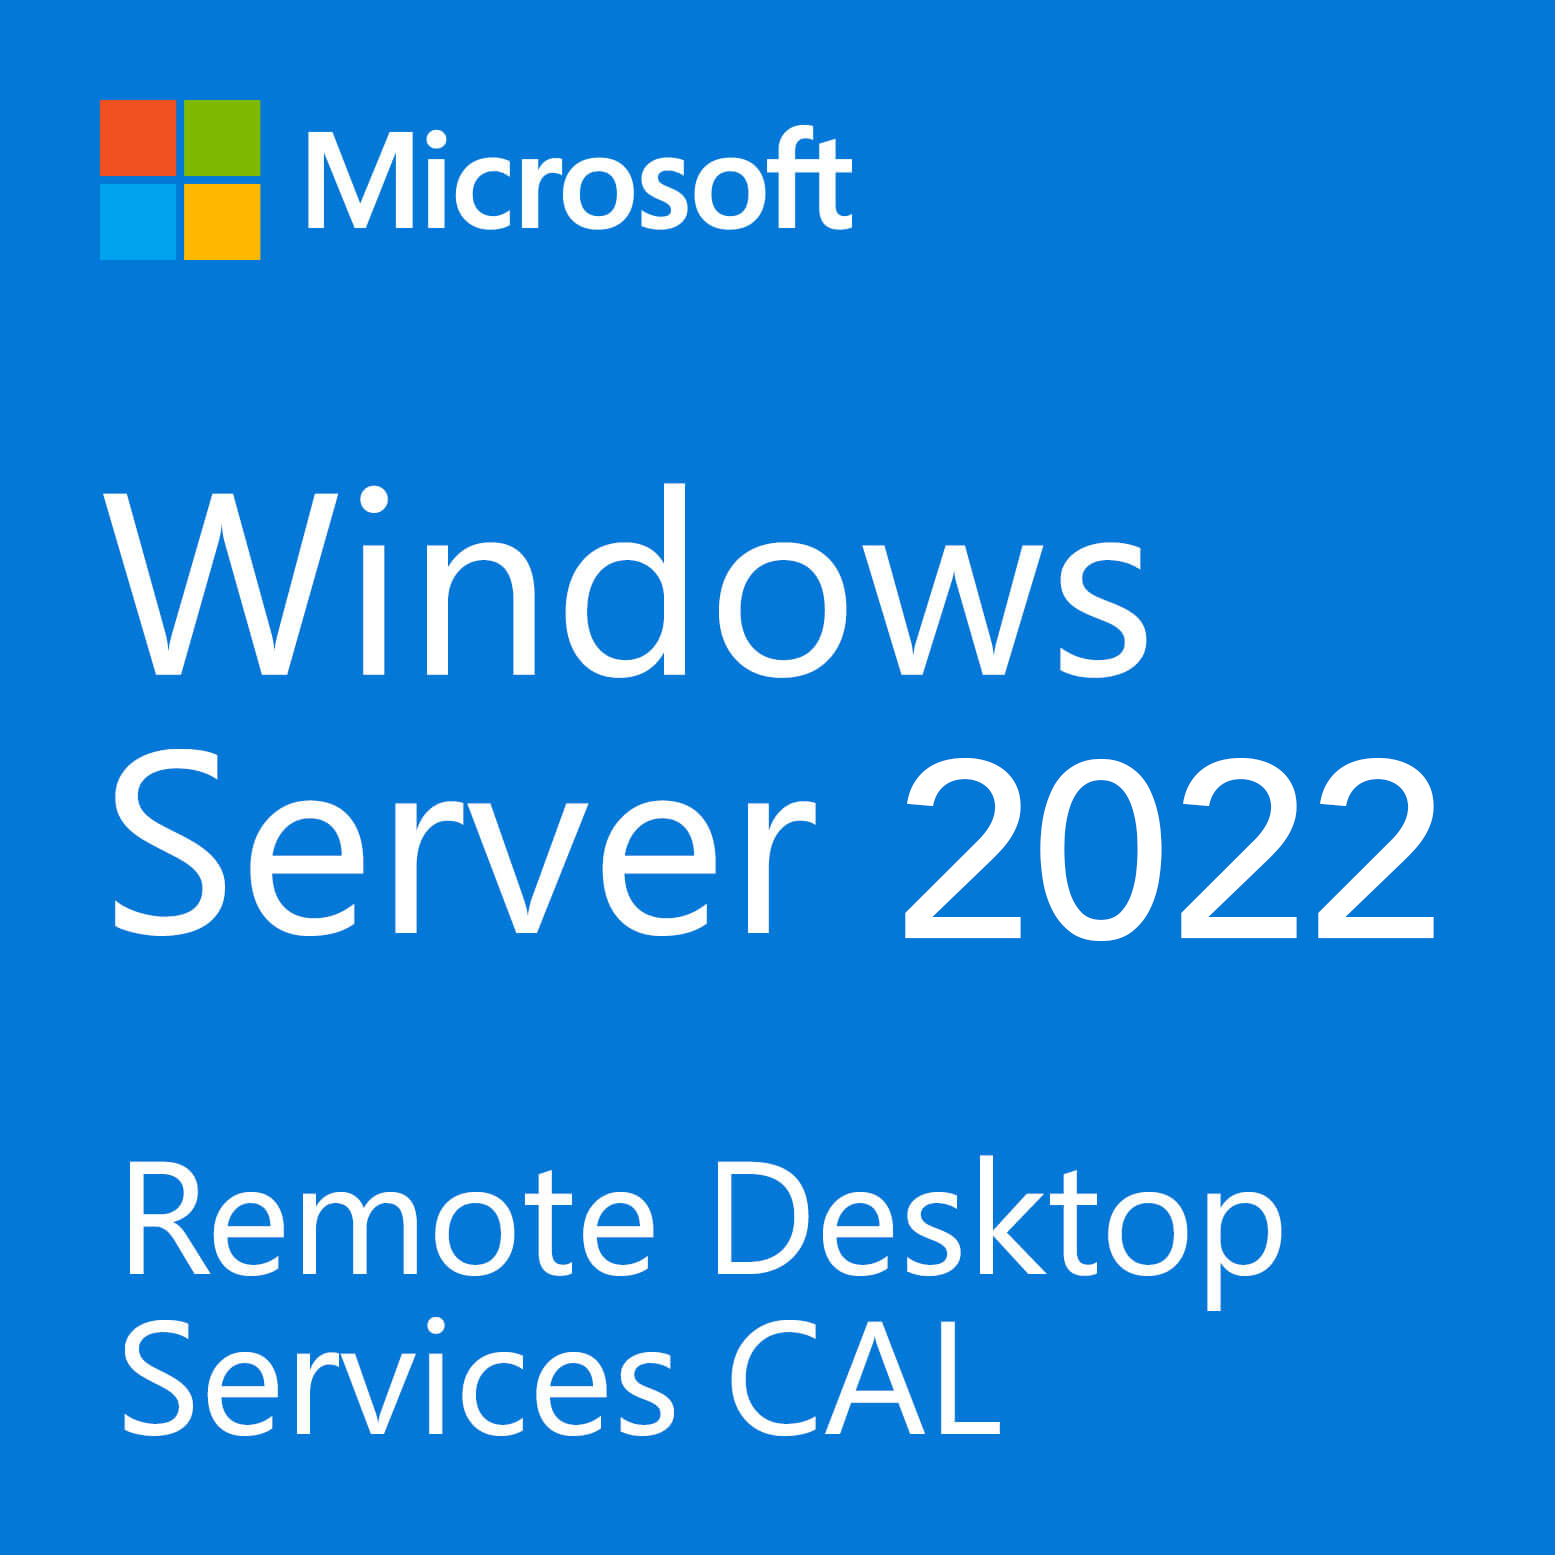 CAL RDS USER / DEVICE for Windows Server 2022